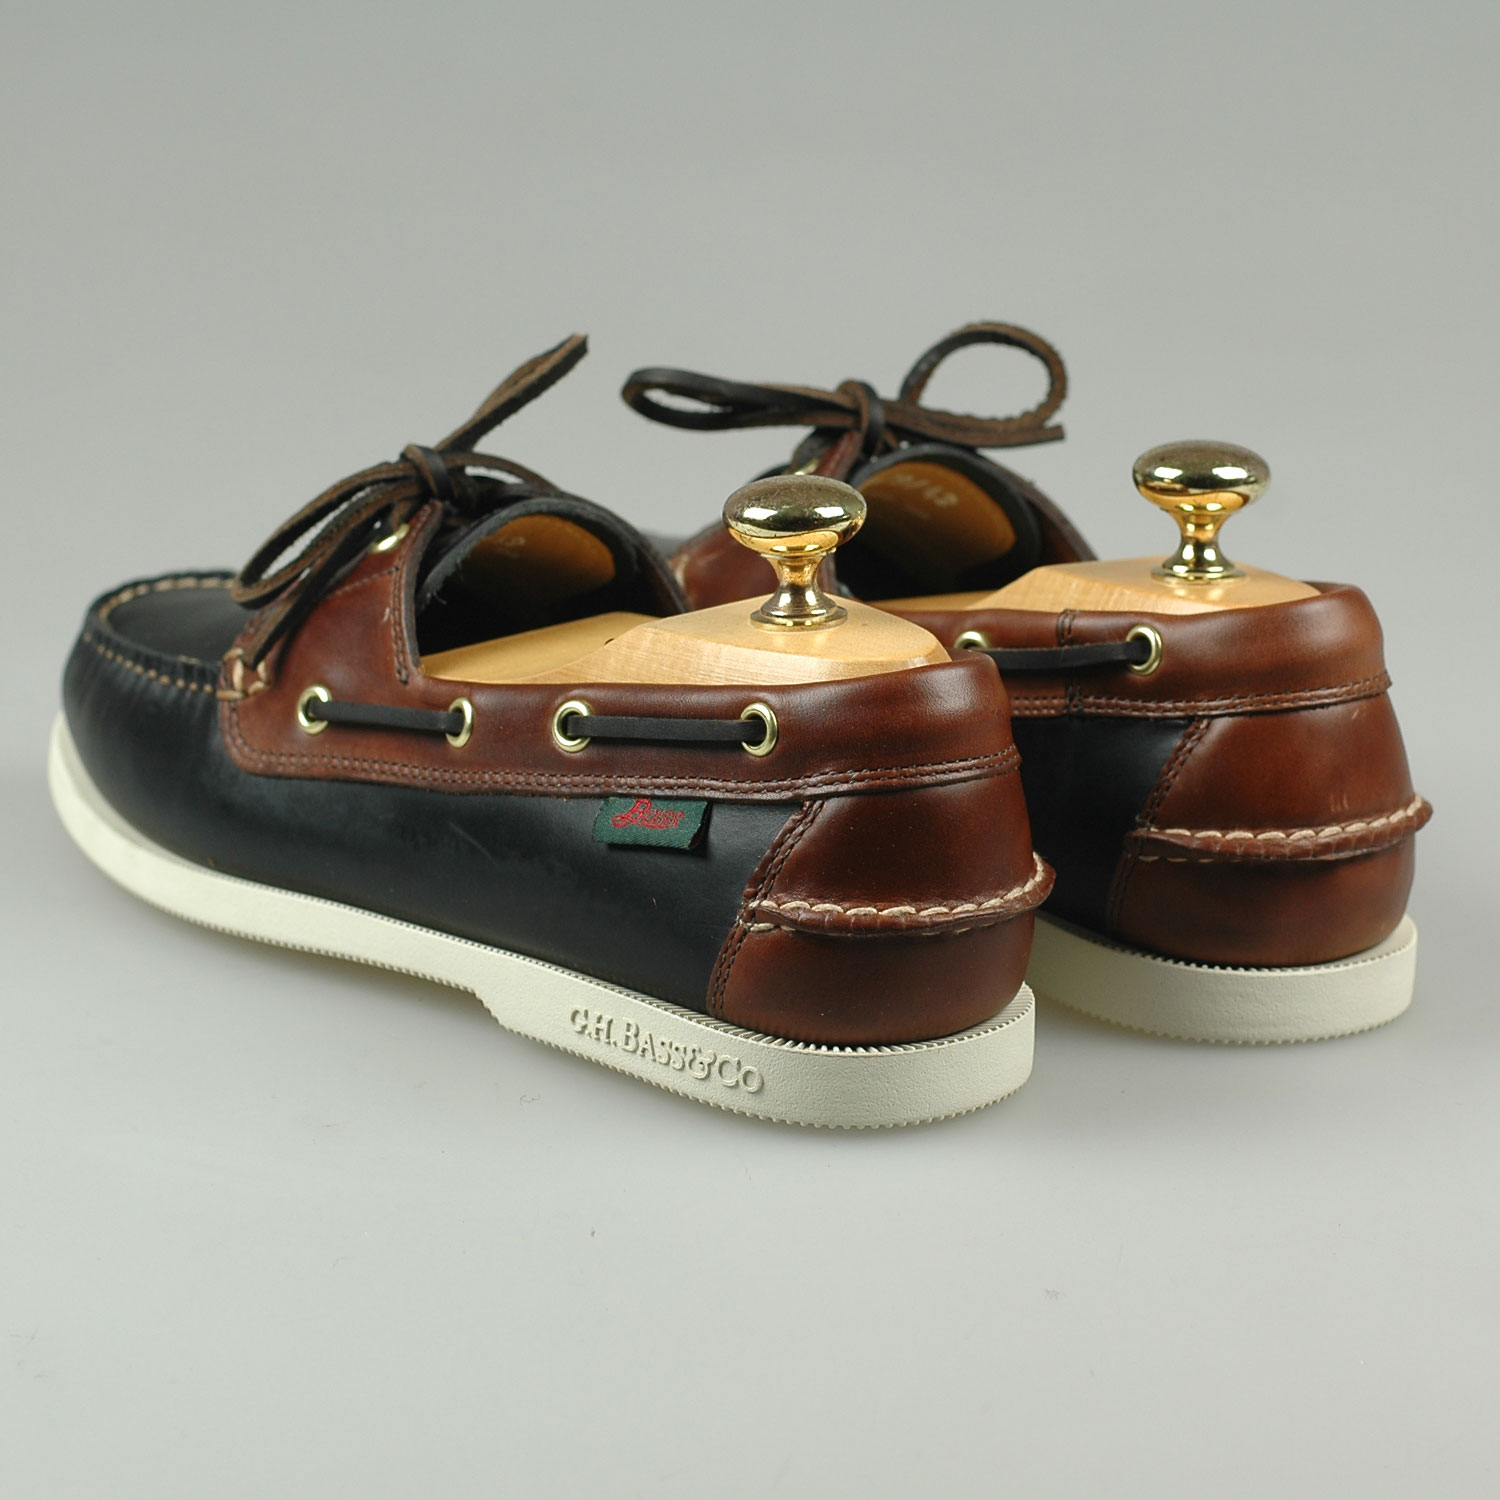 gh bass and co boat shoes